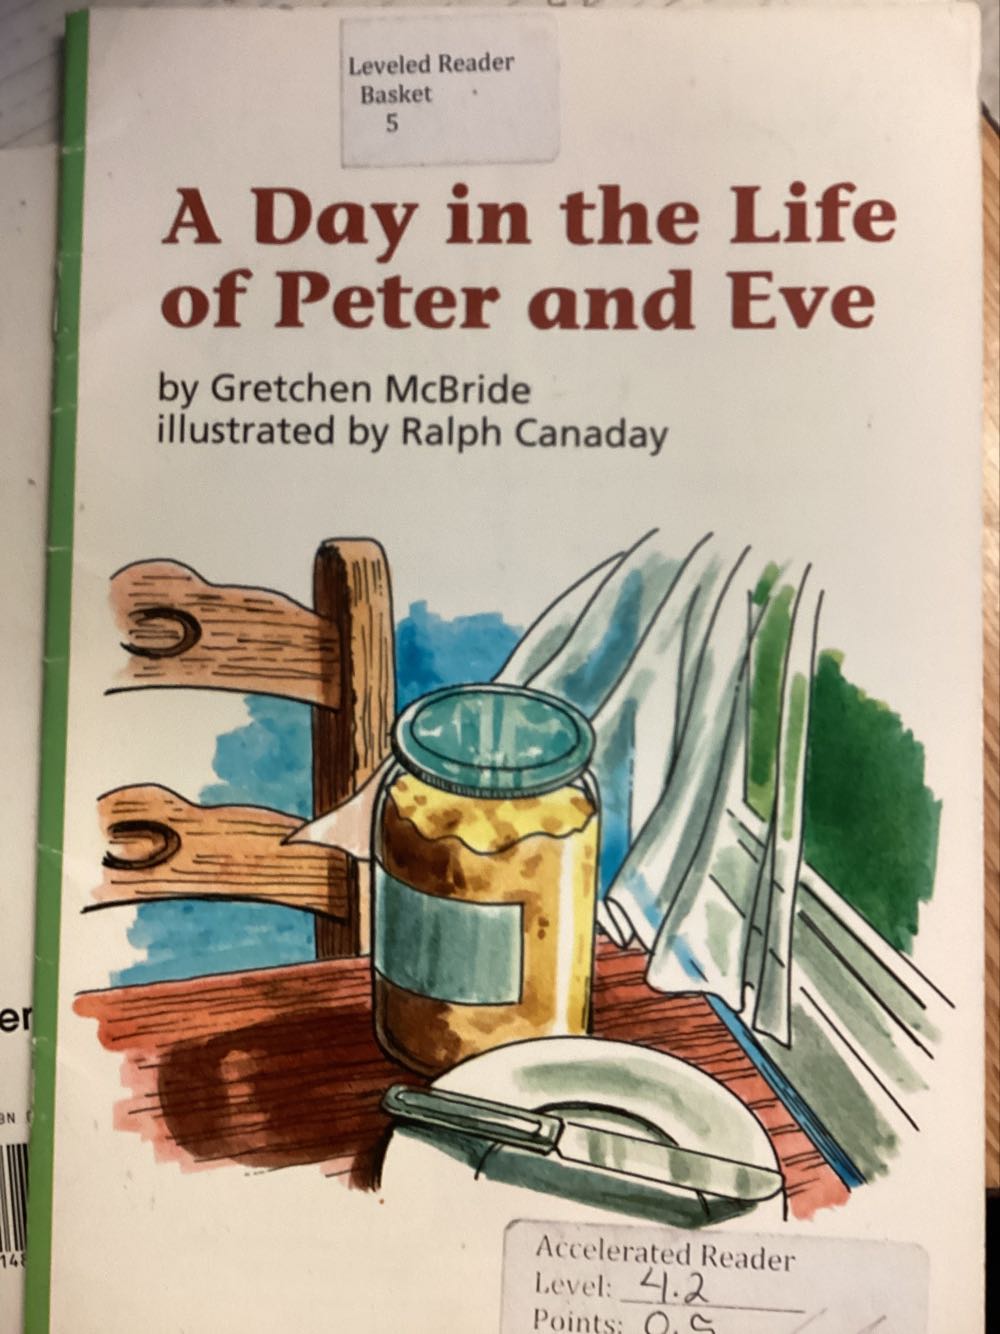 A. Day In The Life Of Peter And Eve - Gretchen Mcbride (Pearson Scott Foresman) book collectible [Barcode 9780328135202] - Main Image 1